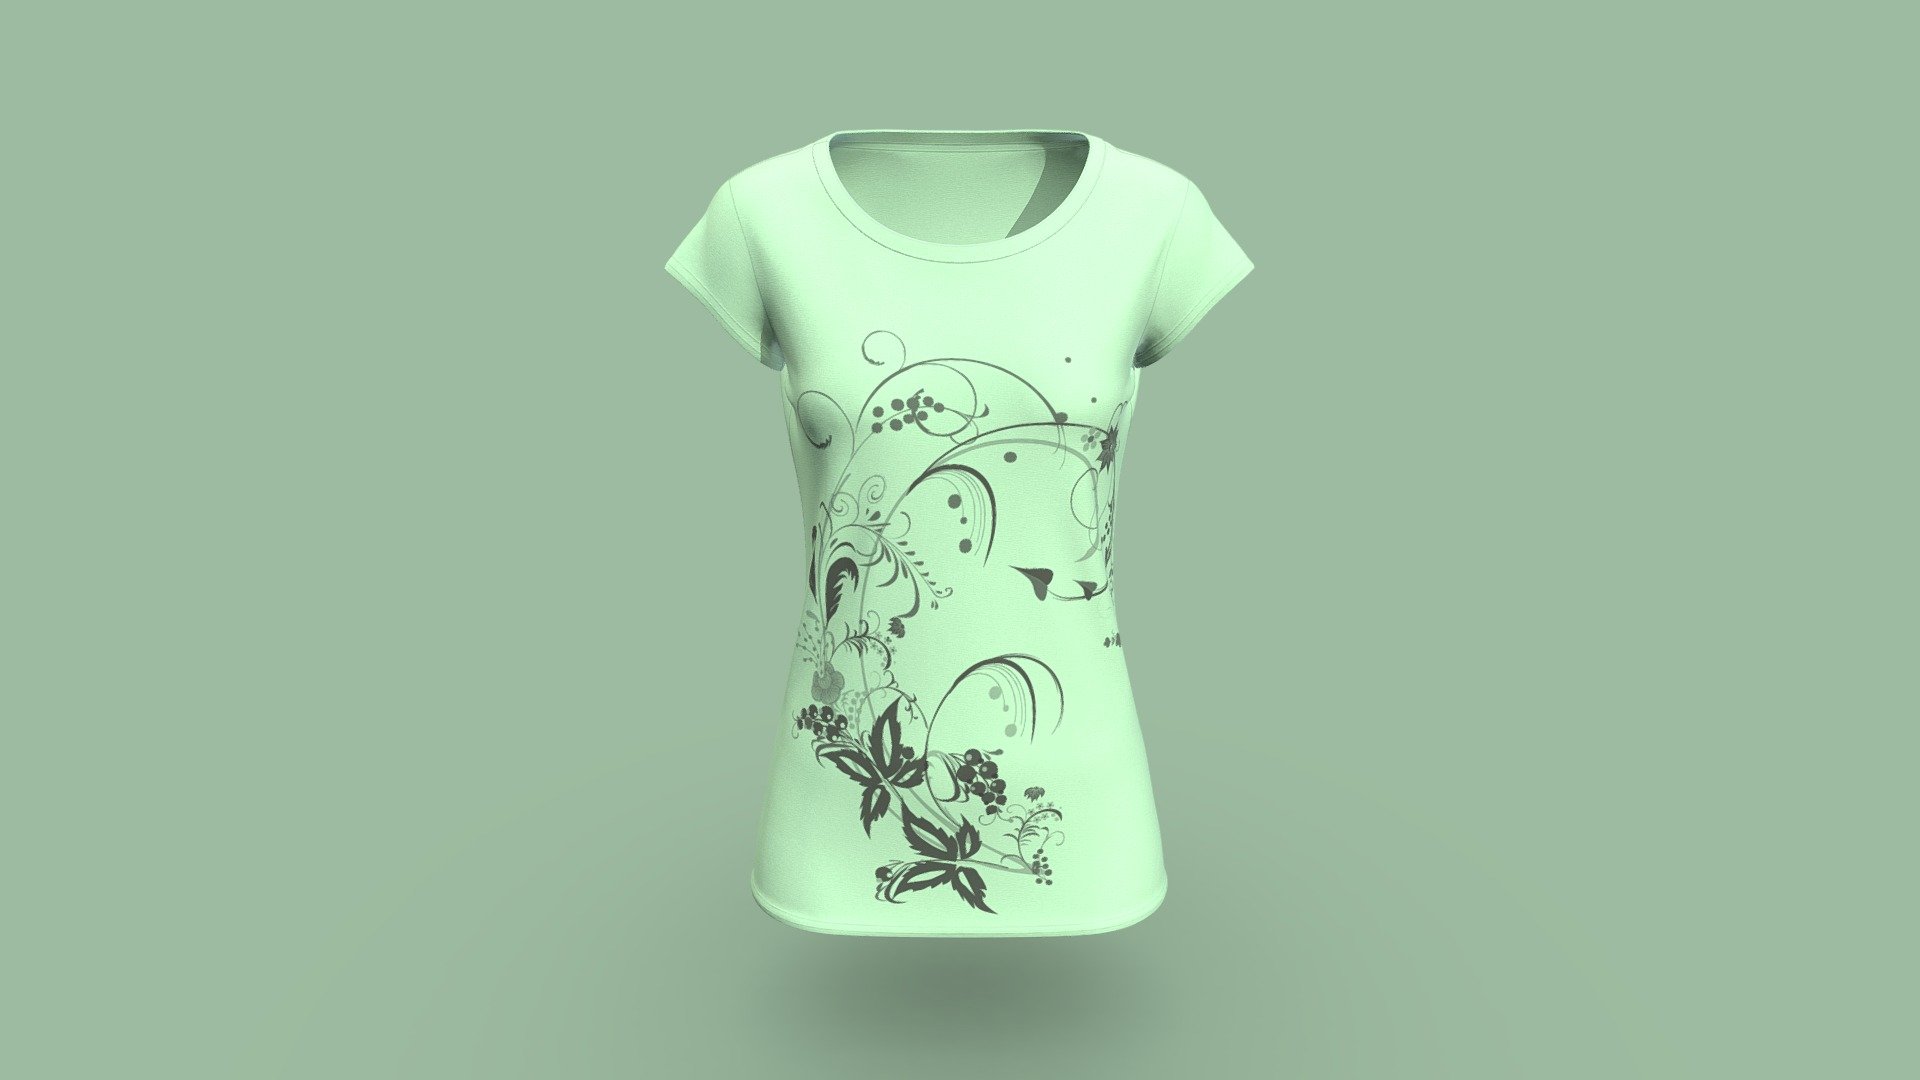 Cloth Title = Green Tops Design

SKU = DG100215 

Category = Women 

Product Type = Tee 

Cloth Length = Regular 

Body Fit = Regular Fit 

Occasion = Casual  

Sleeve Style = Short Sleeve 


Our Services:

3D Apparel Design.

OBJ,FBX,GLTF Making with High/Low Poly.

Fabric Digitalization.

Mockup making.

3D Teck Pack.

Pattern Making.

2D Illustration.

Cloth Animation and 360 Spin Video.


Contact us:- 

Email: info@digitalfashionwear.com 

Website: https://digitalfashionwear.com 


We designed all the types of cloth specially focused on product visualization, e-commerce, fitting, and production. 

We will design: 

T-shirts 

Polo shirts 

Hoodies 

Sweatshirt 

Jackets 

Shirts 

TankTops 

Trousers 

Bras 

Underwear 

Blazer 

Aprons 

Leggings 

and All Fashion items. 





Our goal is to make sure what we provide you, meets your demand 3d model